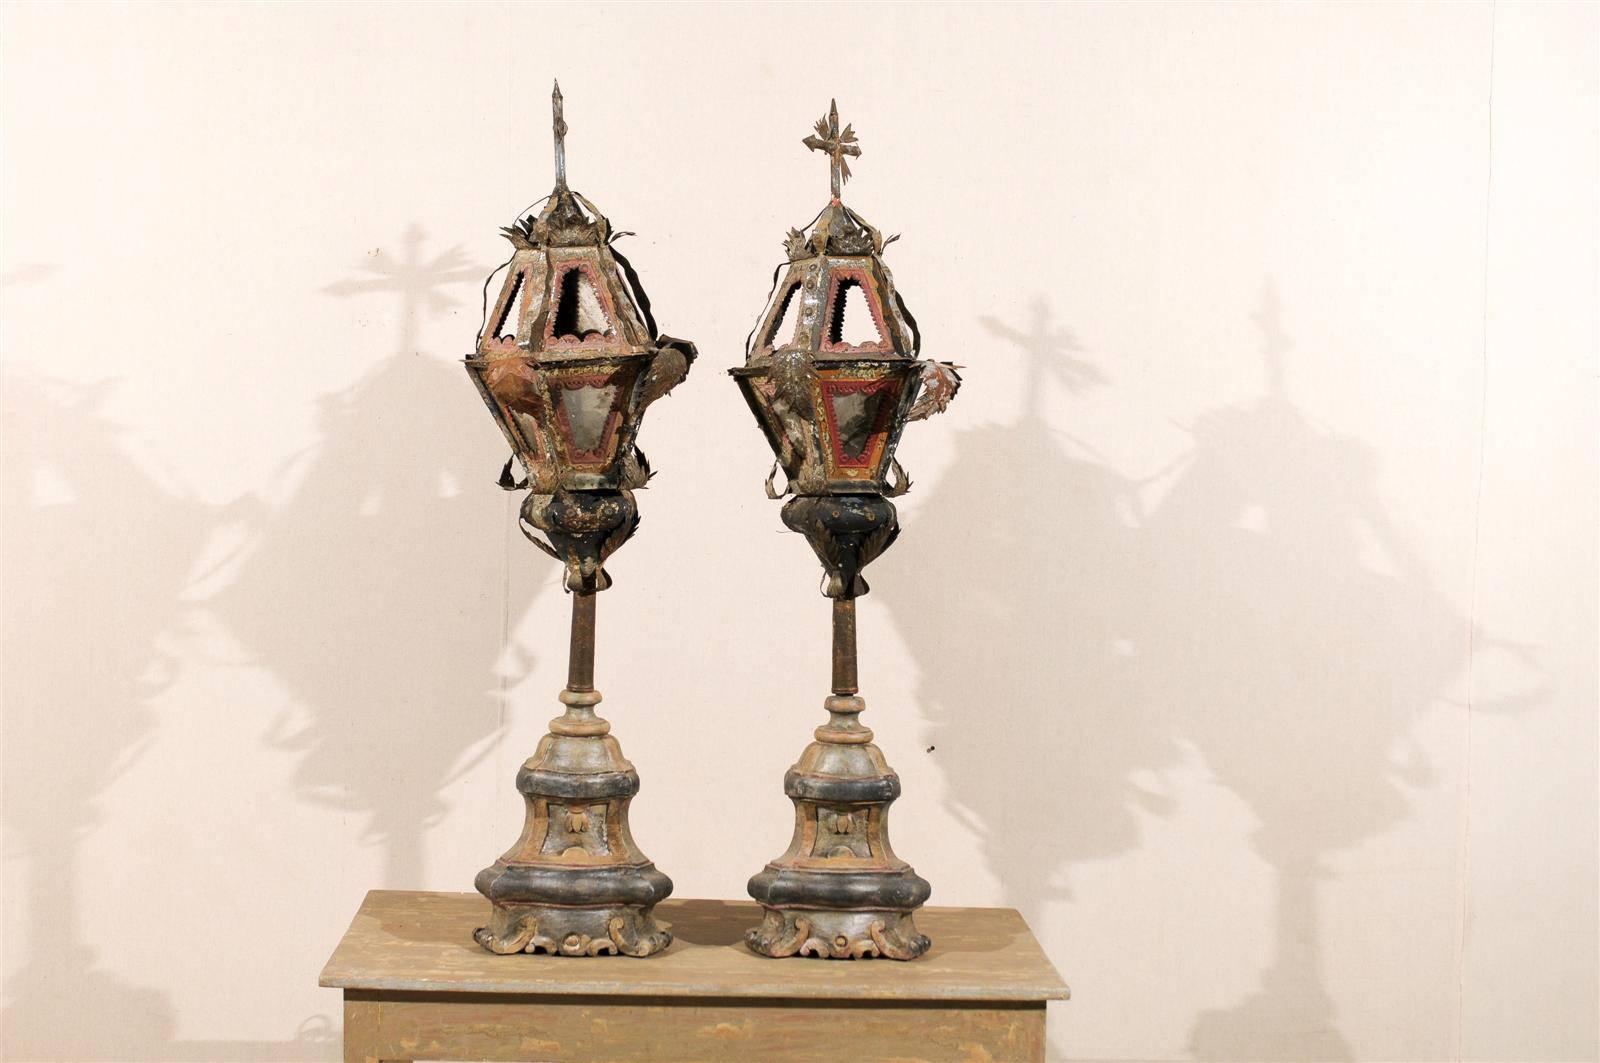 A pair of exquisite 19th century Italian painted metal table lamps on later painted wood bases with rusty look, nice red and orange paint color, topped with crosses and sun rays. They are also ornate with acanthus leaves. These lamps stun by their